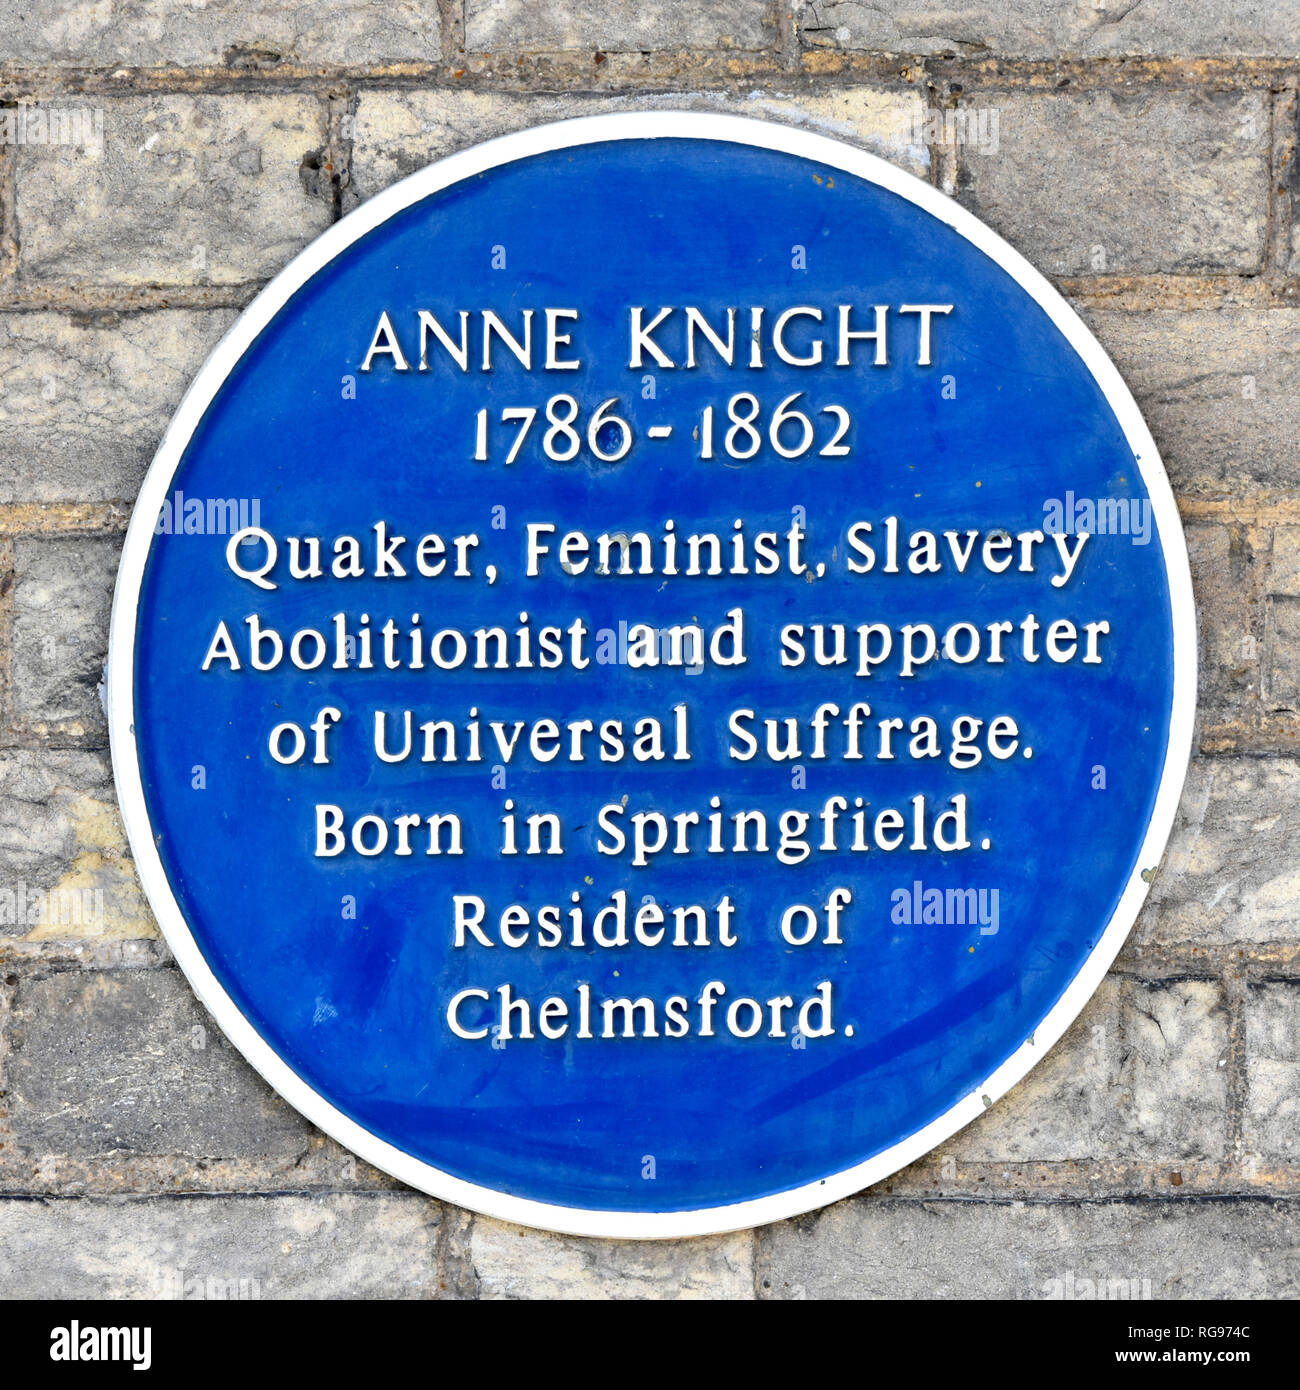 Fame of Anne Knight noted on blue plaque as famous Quaker feminist Slavery abolitionist & supporter of Universal Suffrage Chelmsford Essex England UK Stock Photo